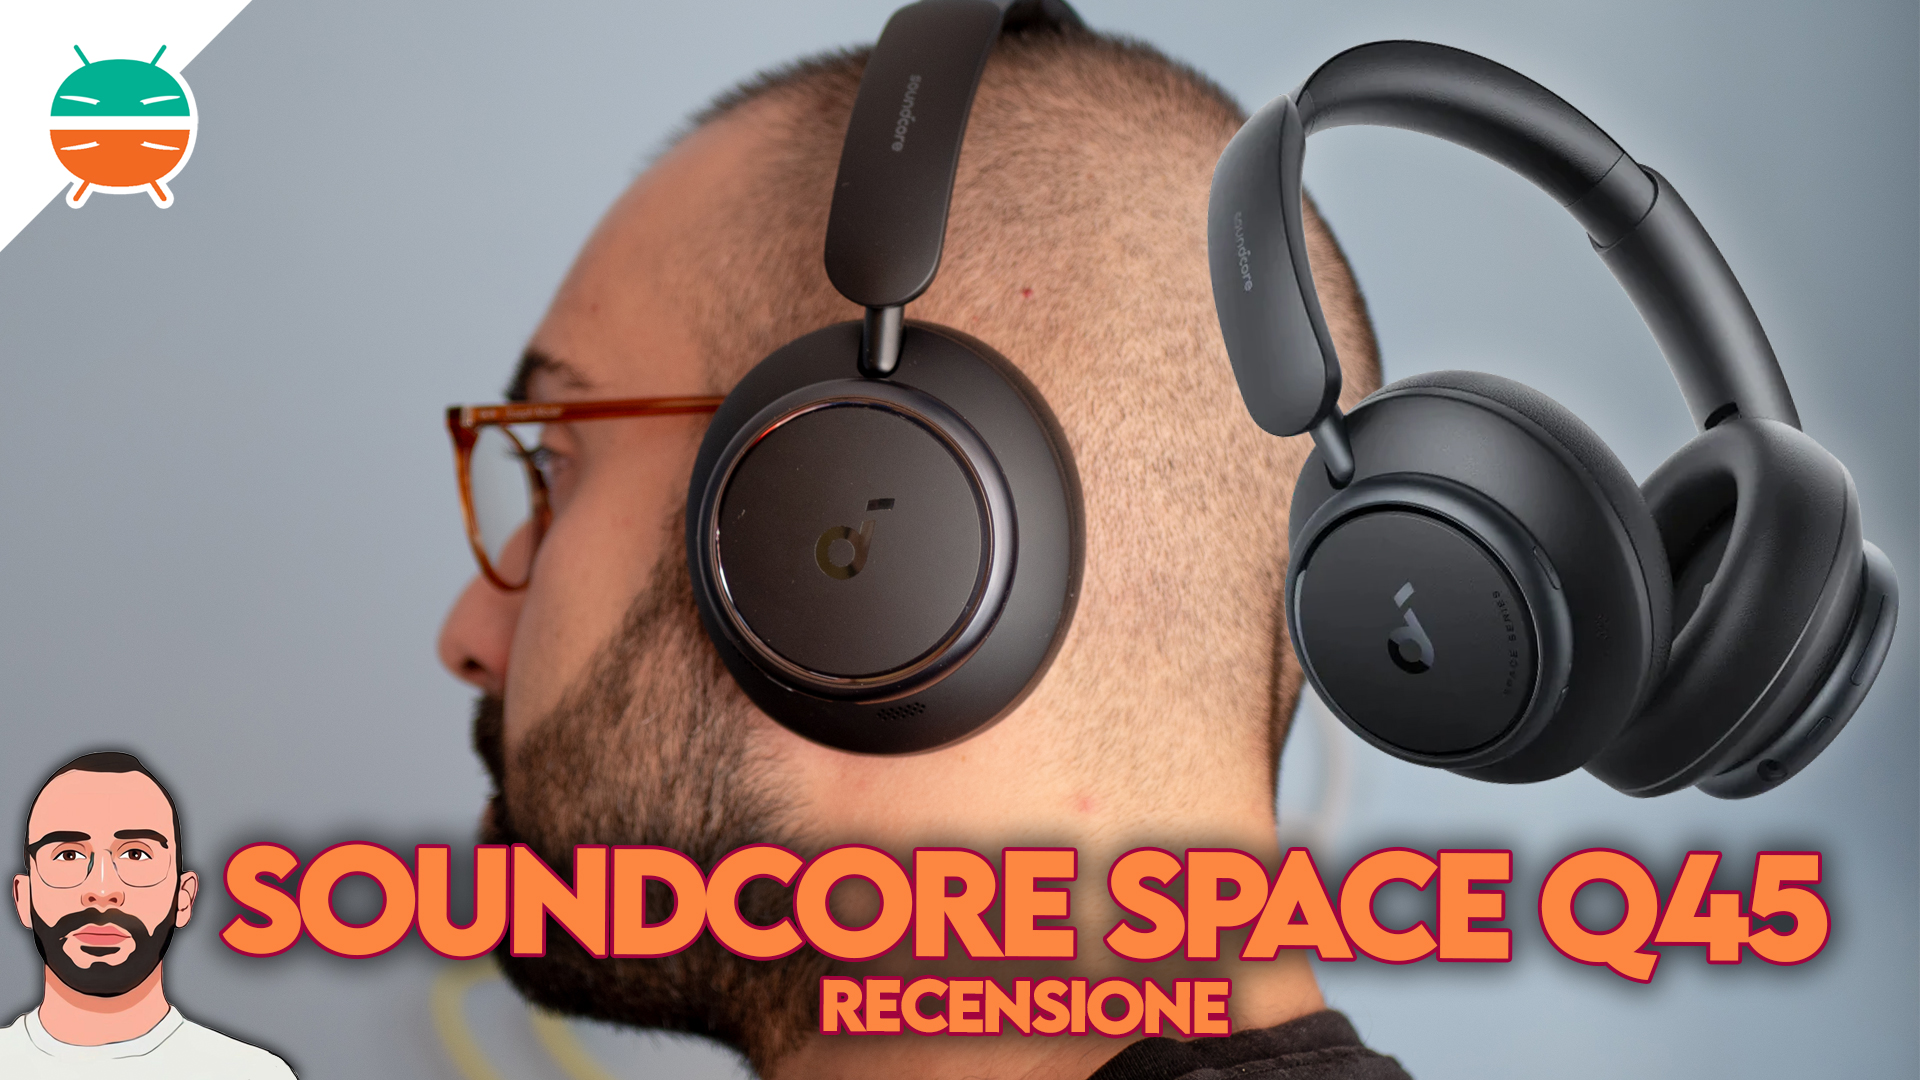 Soundcore Space Q45 review: specifications, ANC and price